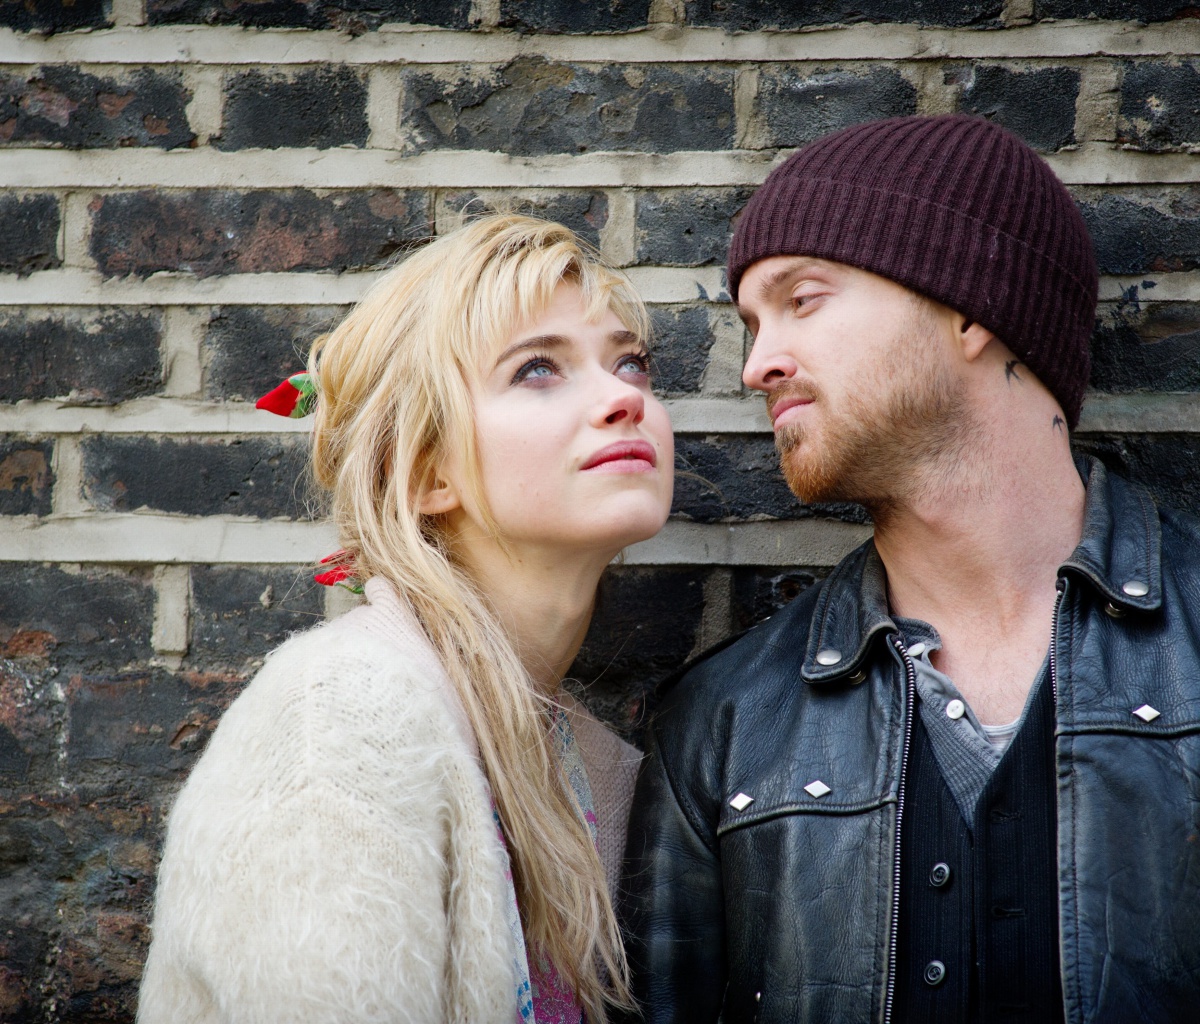 A Long Way Down with Aaron Paul and Imogen Poots wallpaper 1200x1024